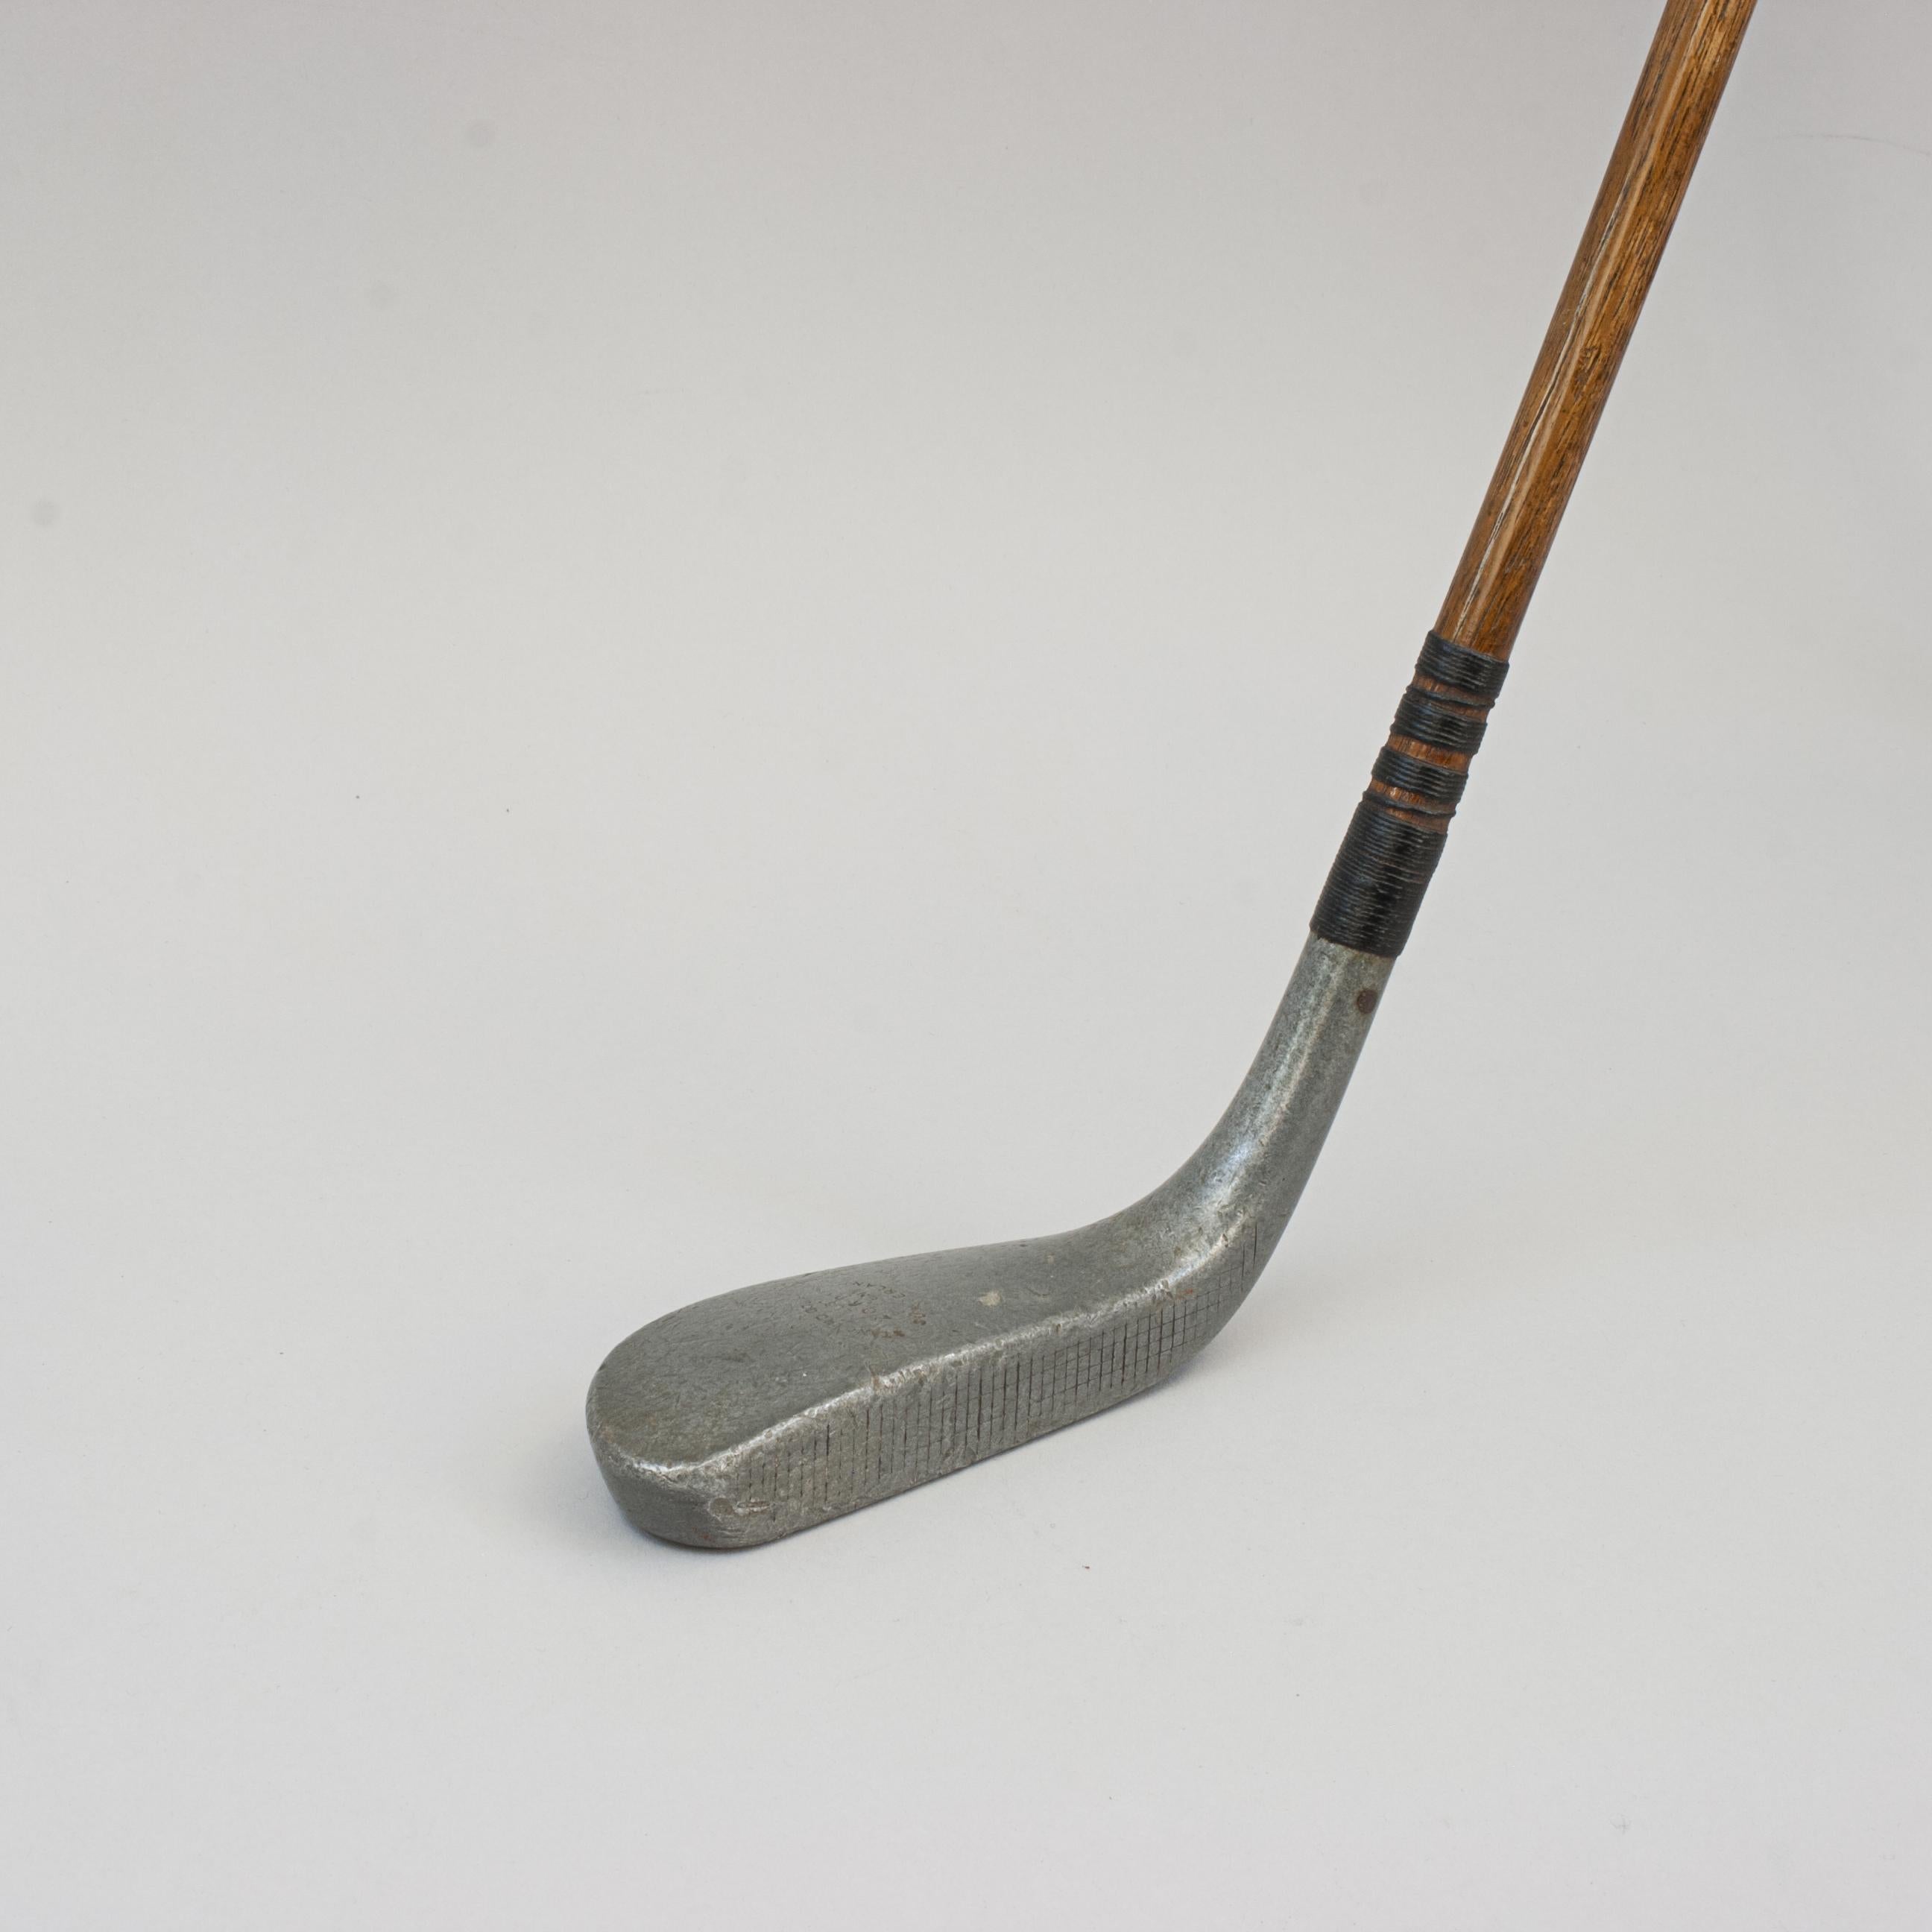 Vintage Hickory Golf Club, Braid Mills Long Nose Putter.
A good example of an aluminium long nose Braid Mills putter by the Standard Golf Co. The top of the head is stamped 'STANDARD GOLF Co., MILLS 2062, PATENT, SUNDERLAND', whilst the underside is